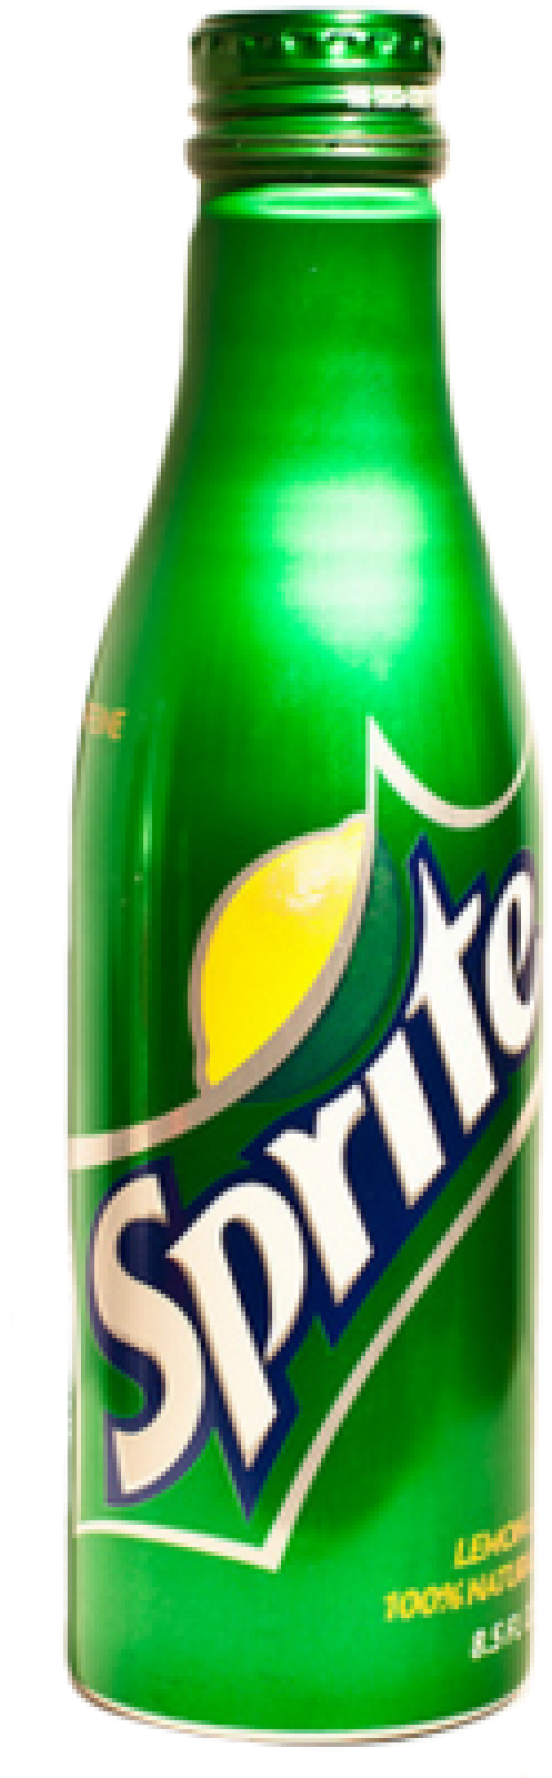 Sprite Png Free Download - Sprite Cranberry Soda - 12 Pack, 12 Fl Oz Cans (600x1777), Png Download